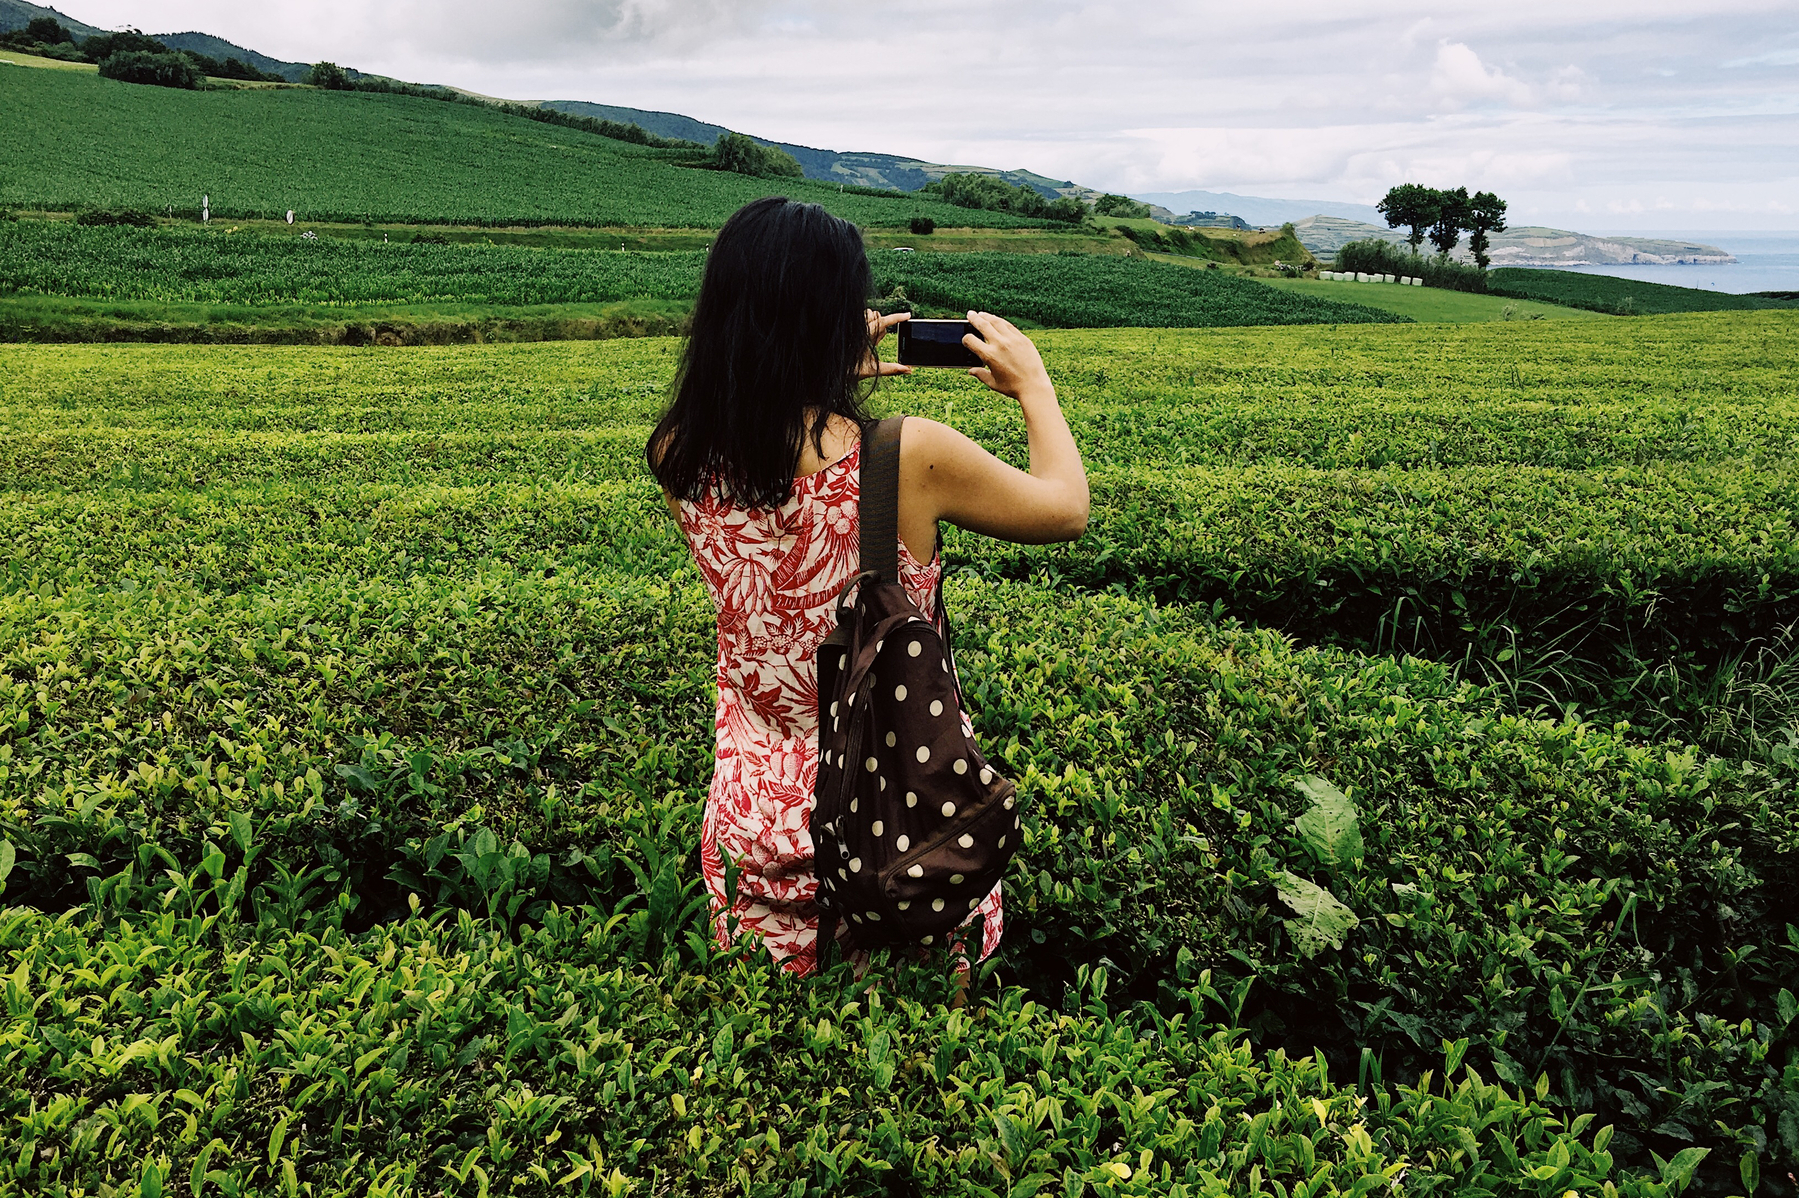 A woman with her back turned to us uses her cellphone to take a photo, in the middle of a tea plantation 